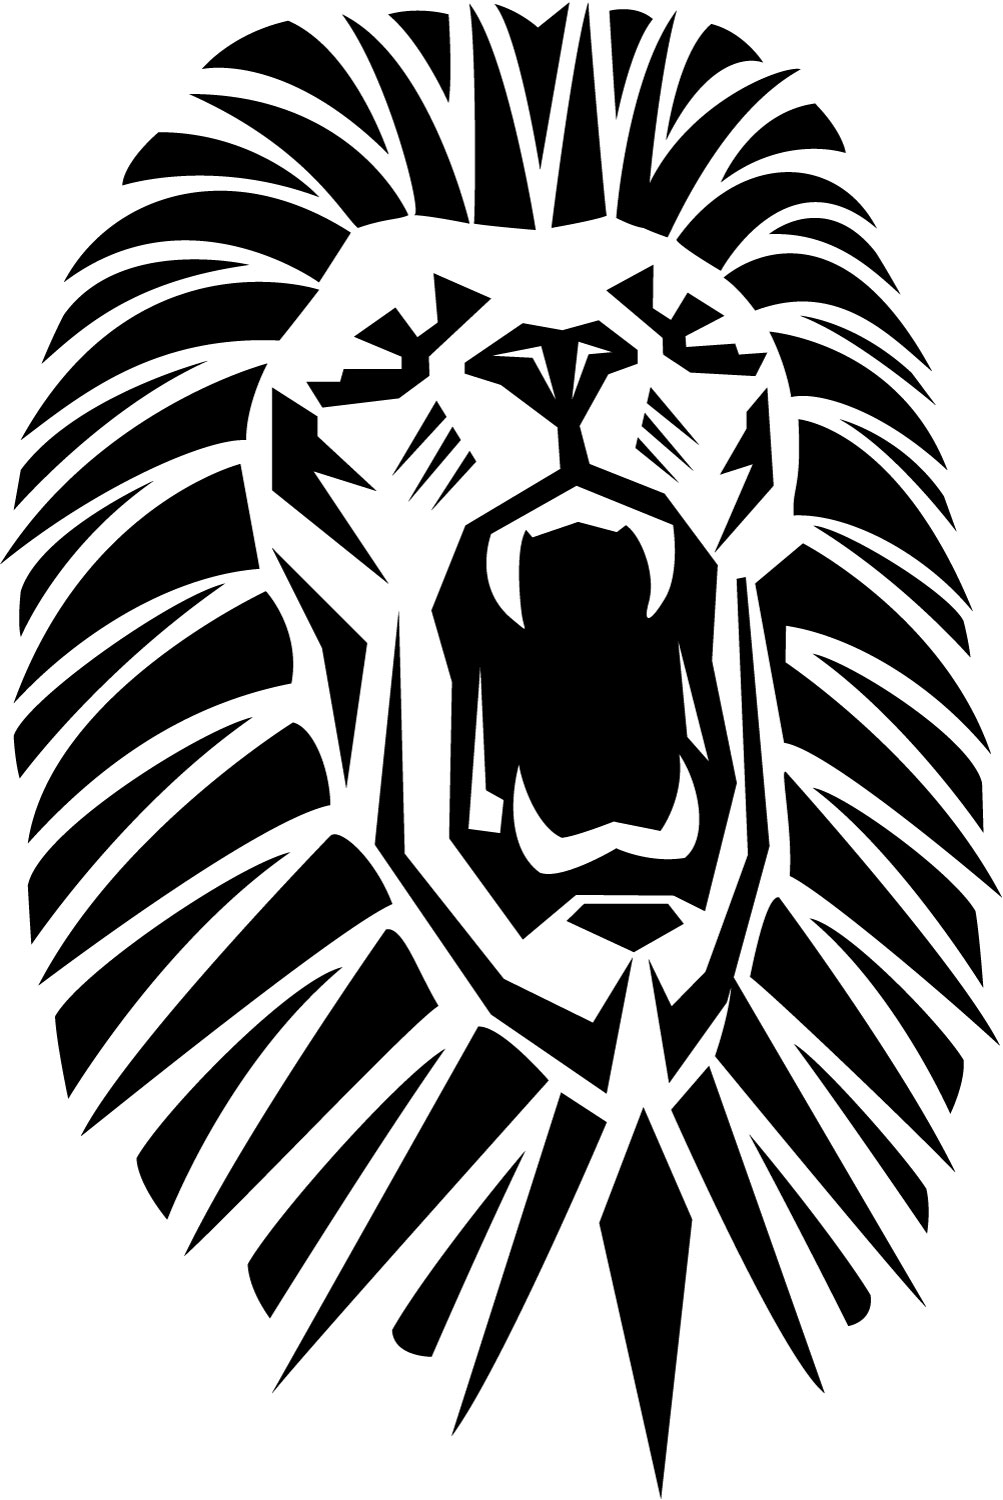 Roaring Lion Artwork Images  Pictures - Becuo